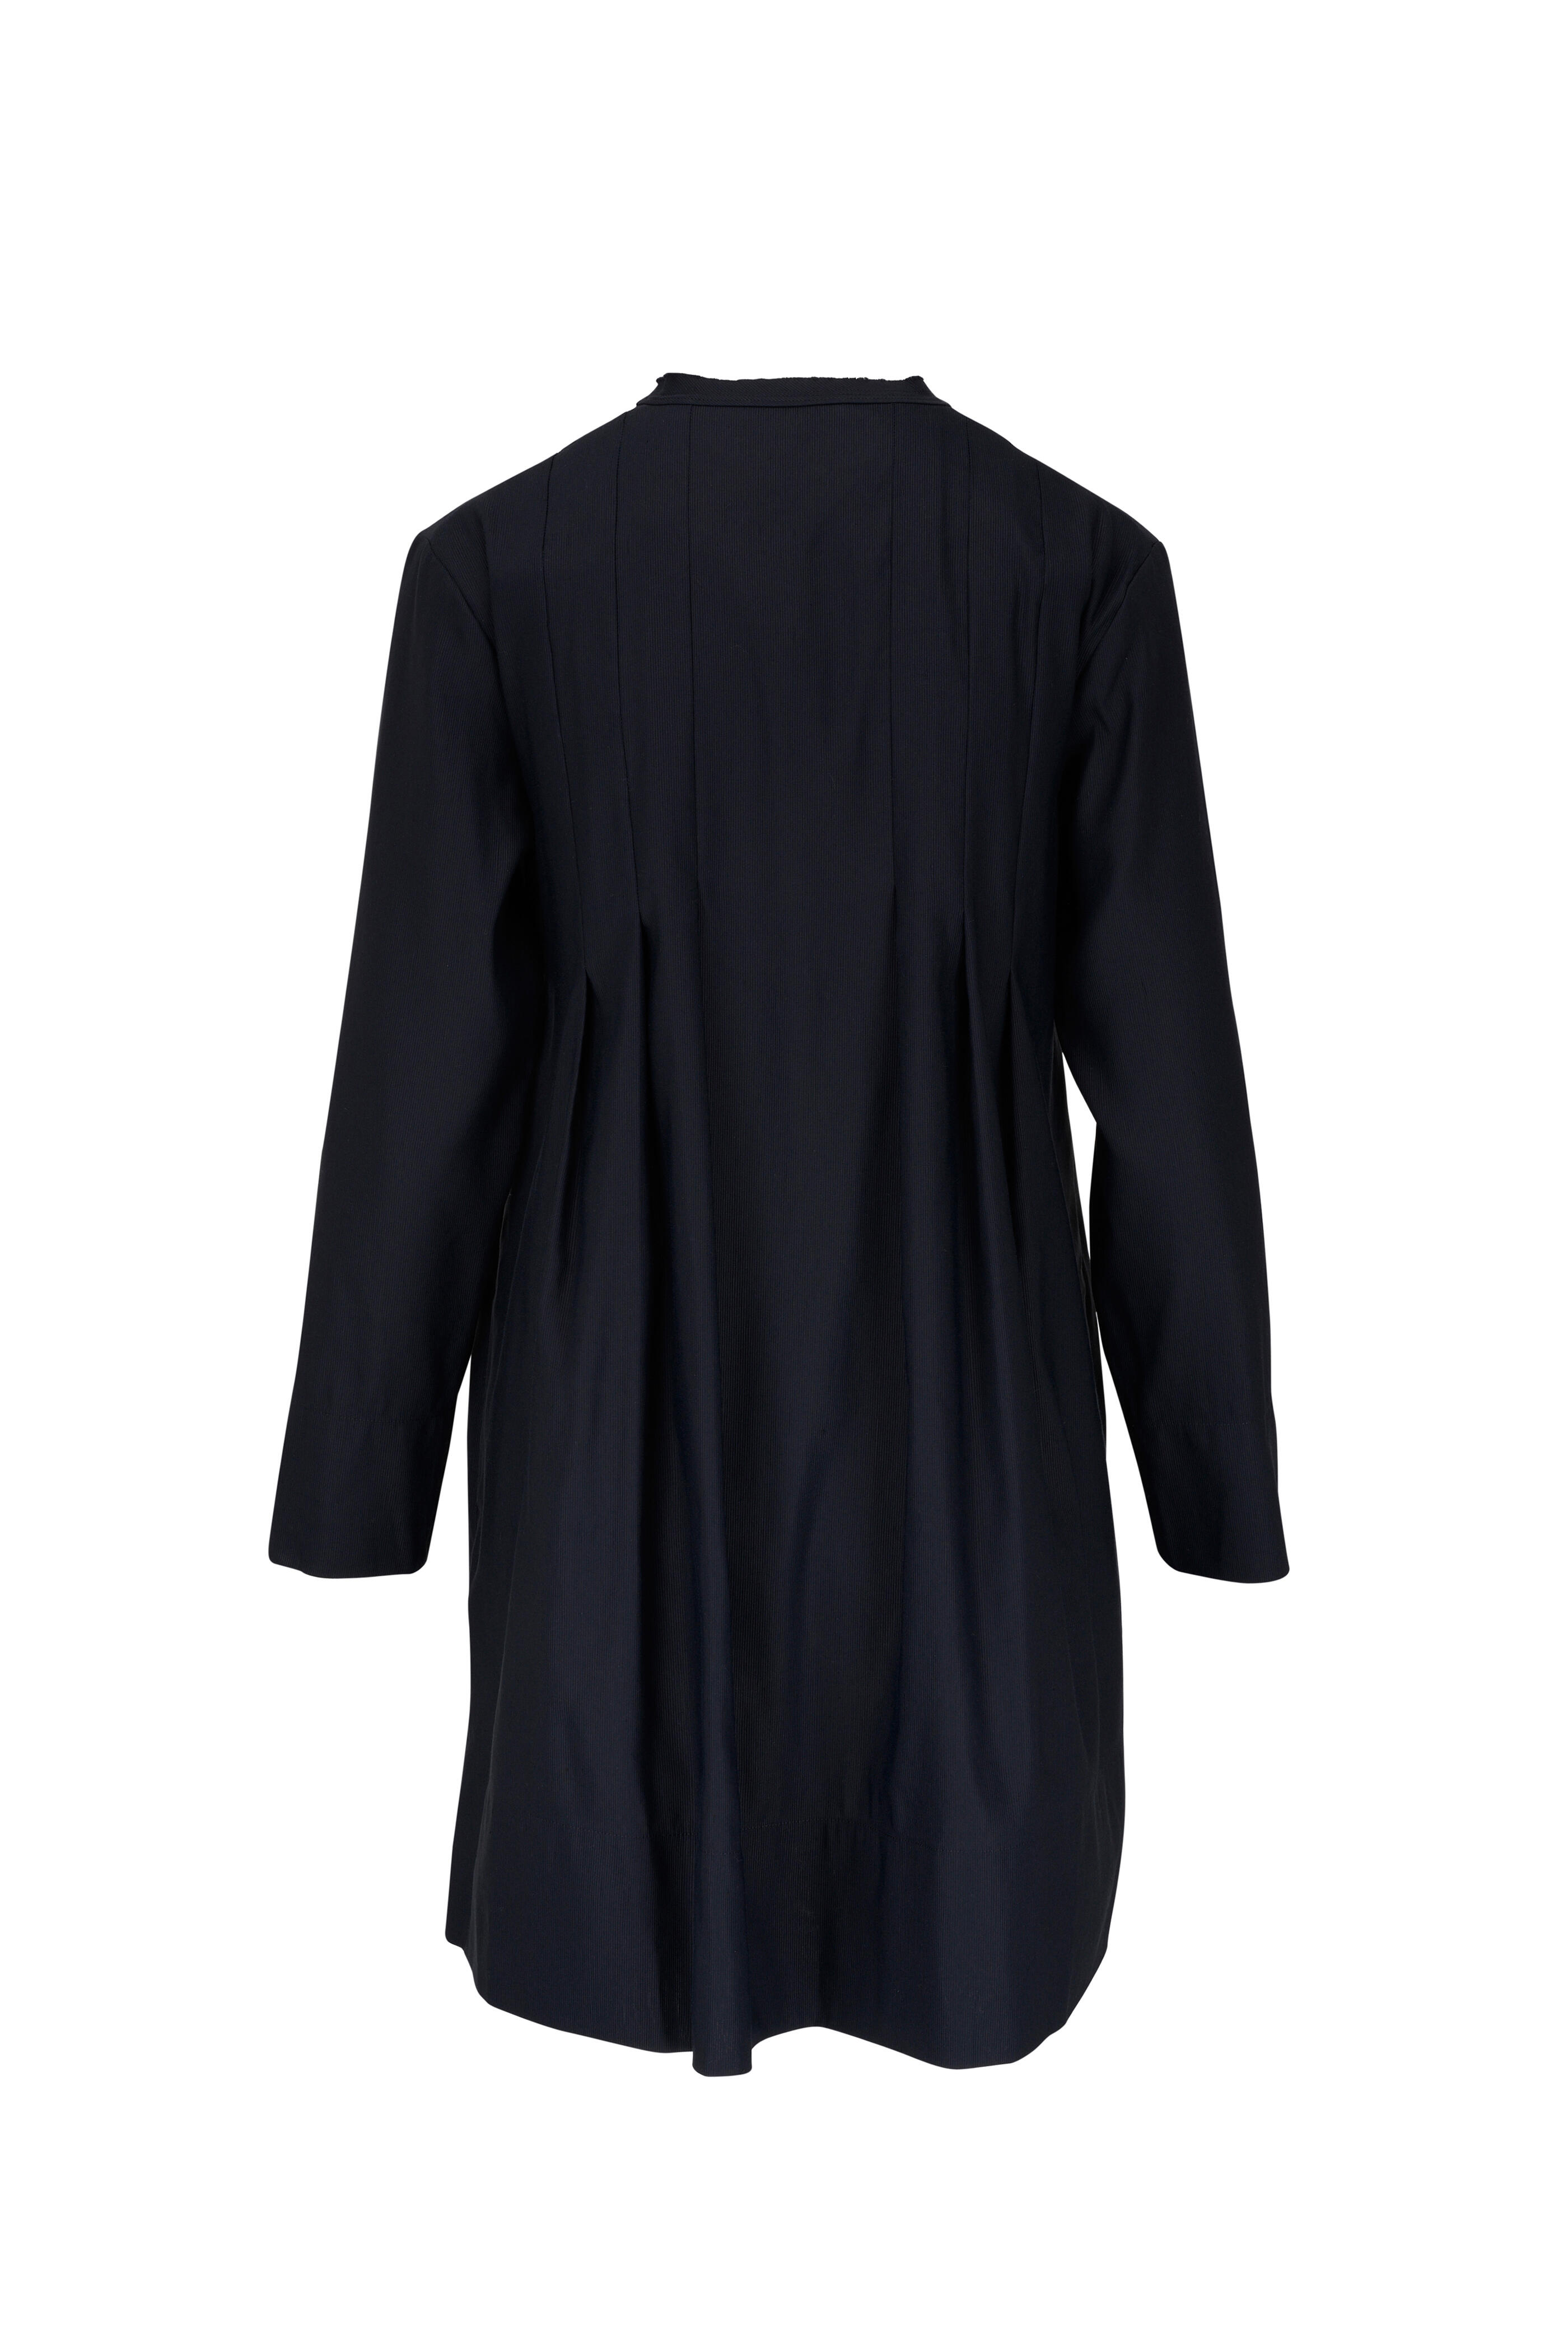 Vince - Black Trapeze Pleated Long Sleeve Dress | Mitchell Stores